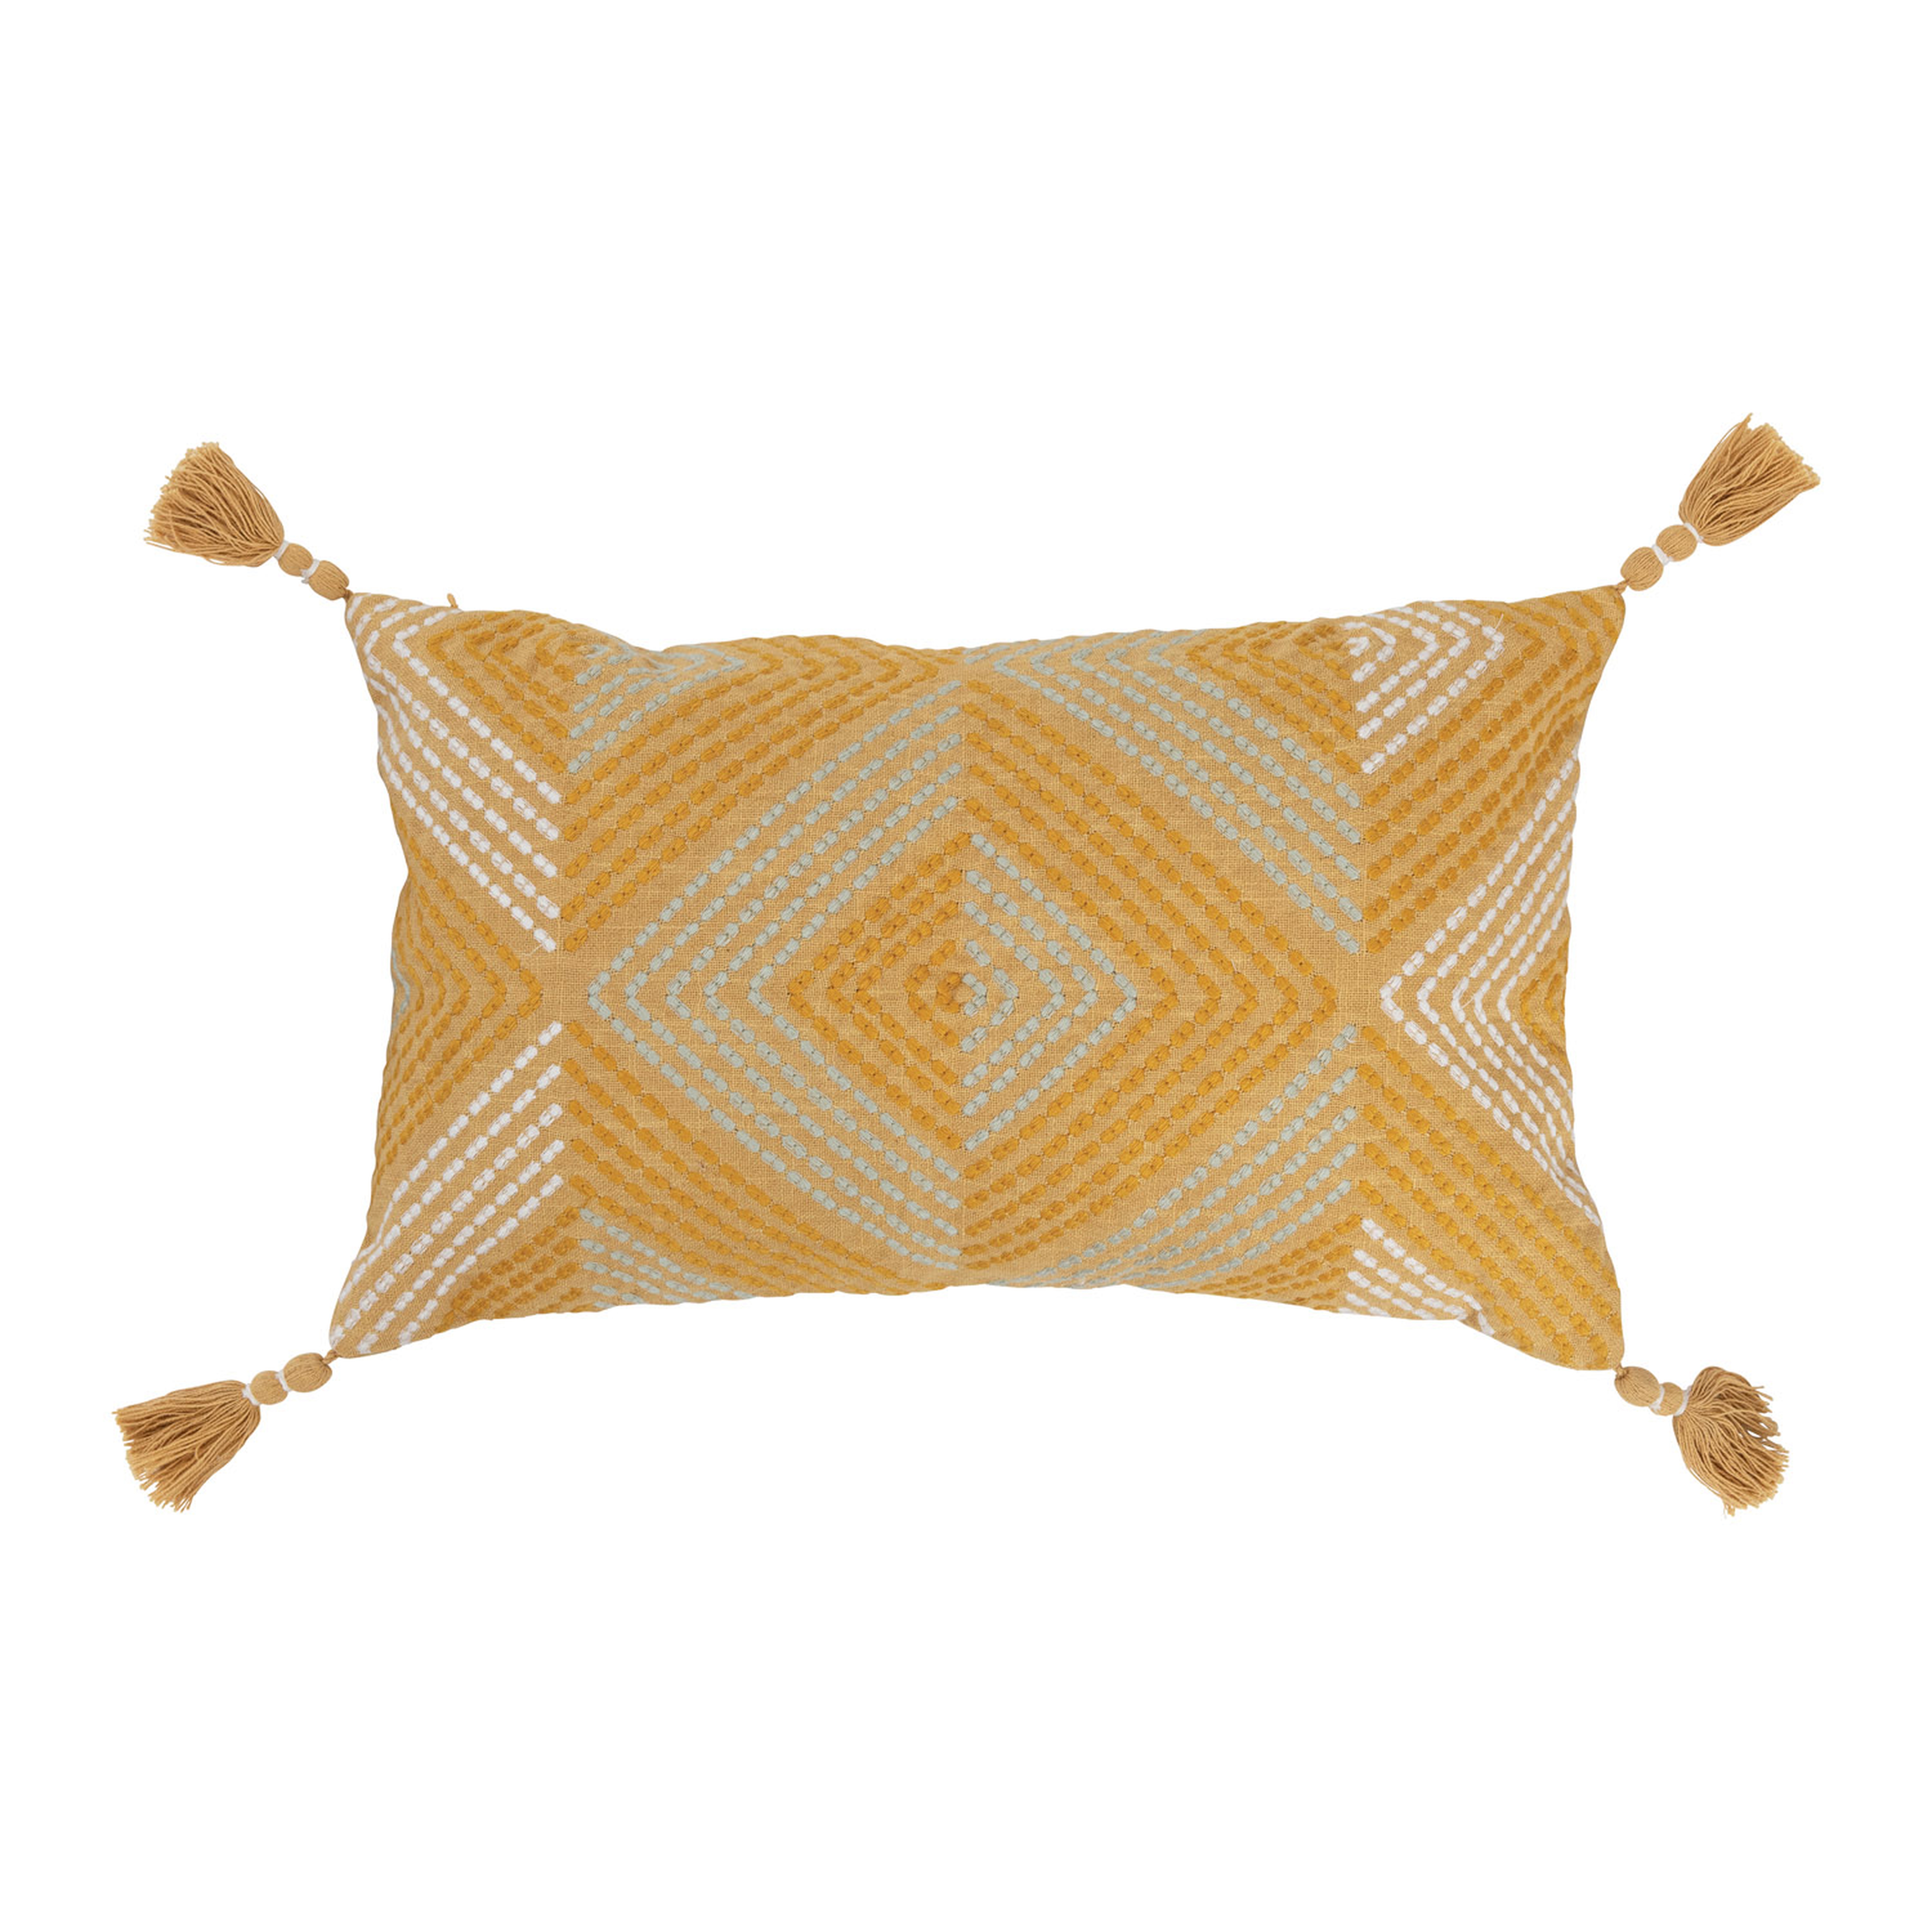 Cotton Embroidered Lumbar Pillow with Tassels - Nomad Home